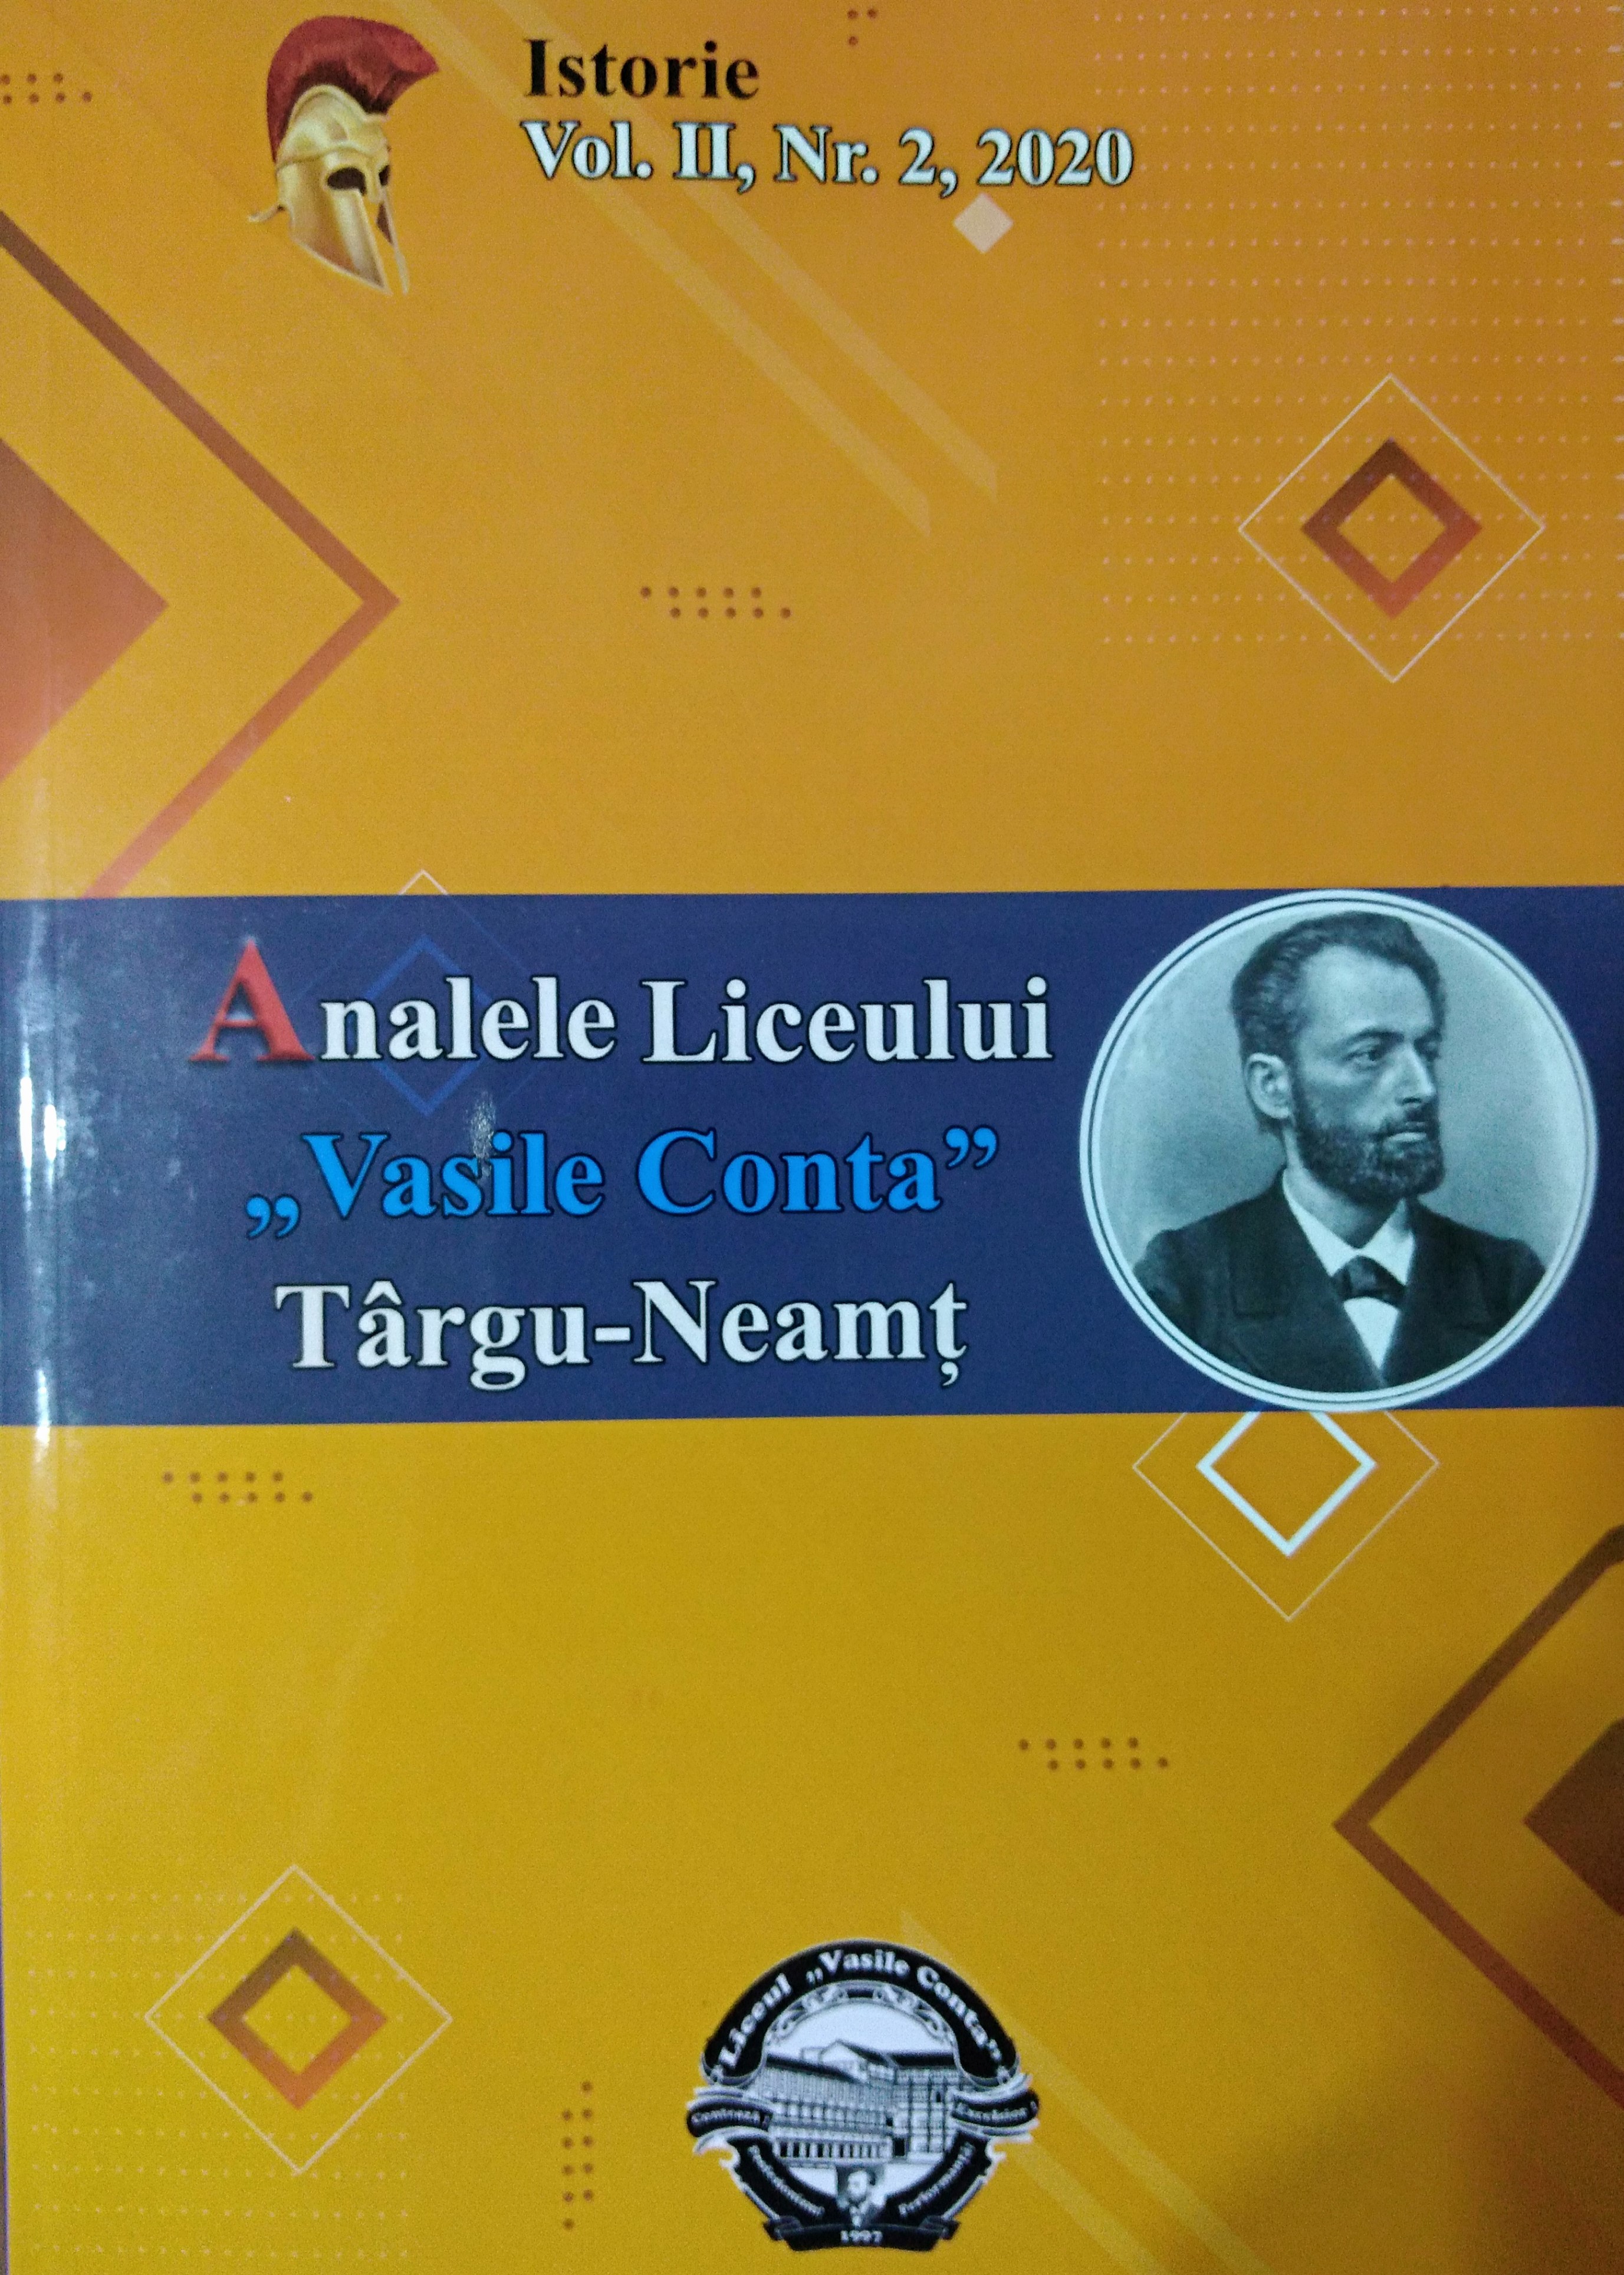 ABOUT THE HISTORY OF TÂRGU NEAMȚ Cover Image